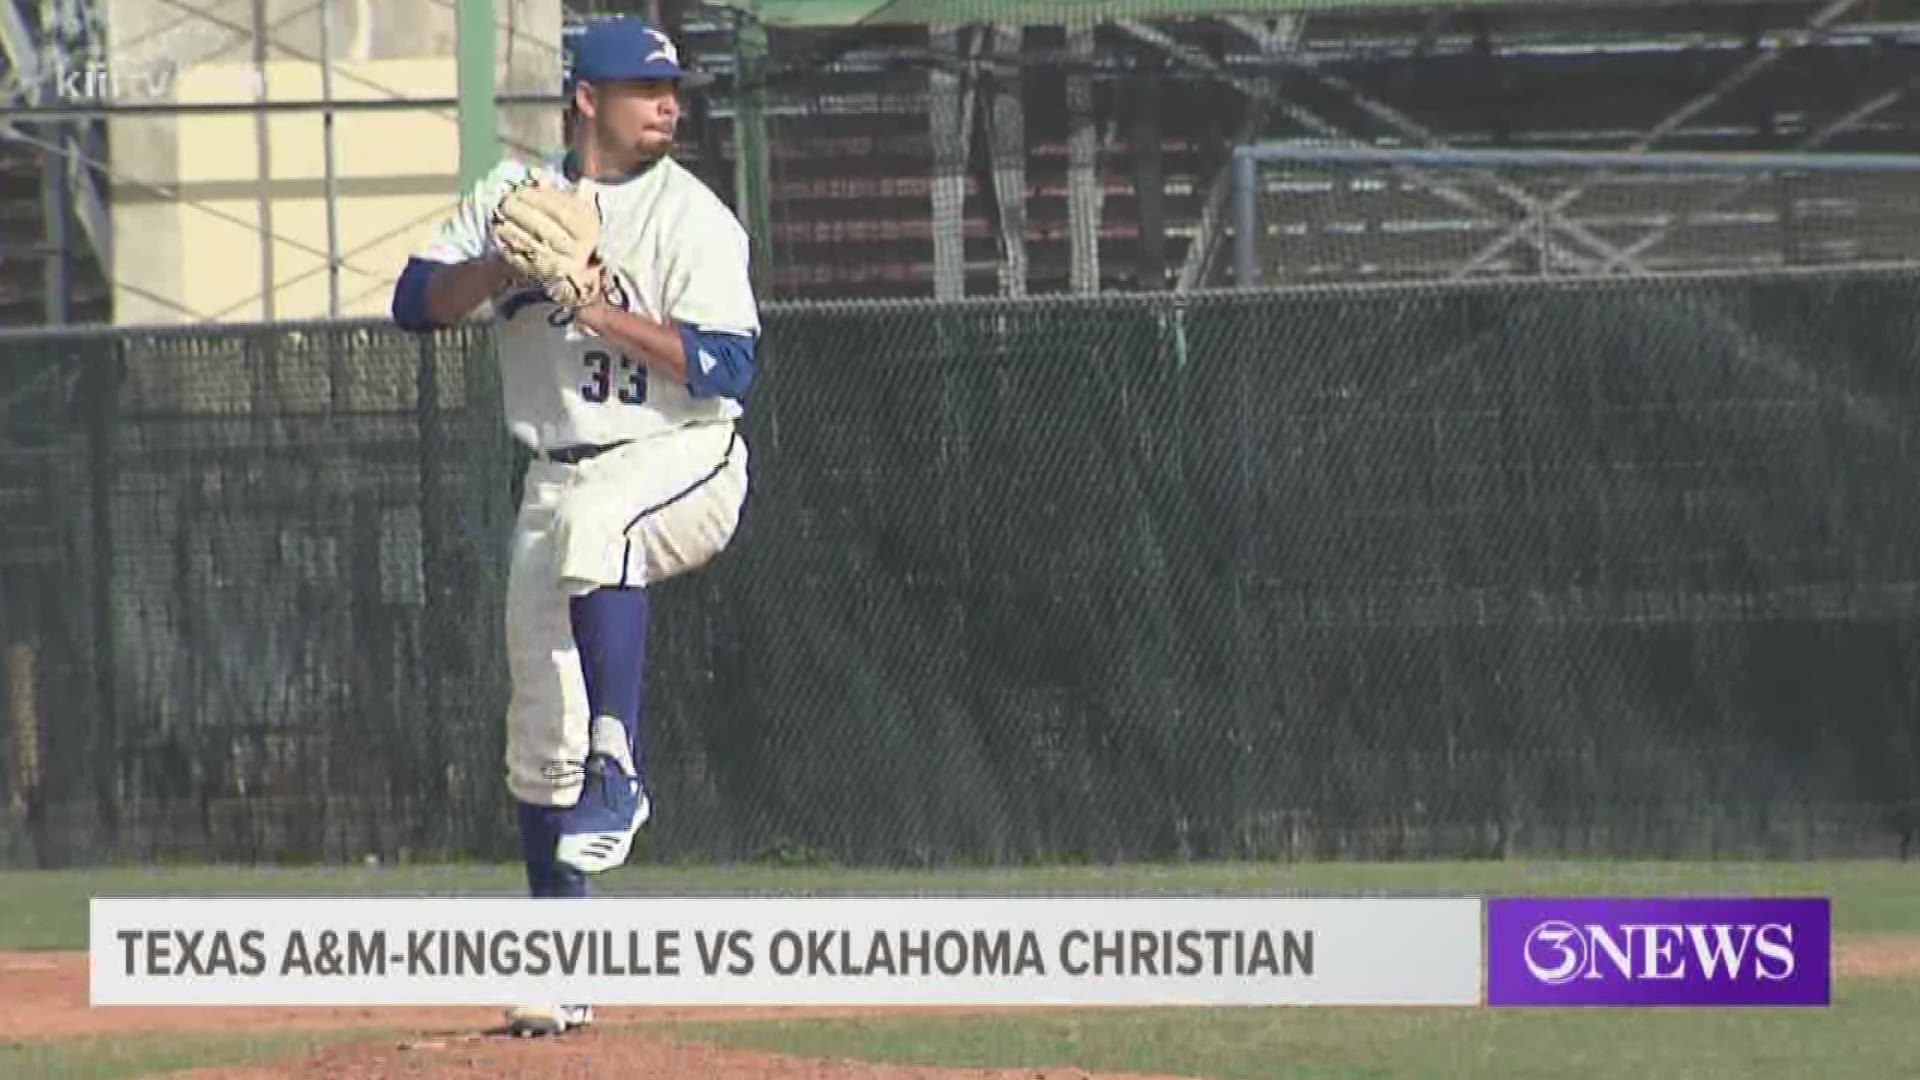 Texas A&M-Kingsville clinched the series over Oklahoma Christian with a 15-8 game two win.